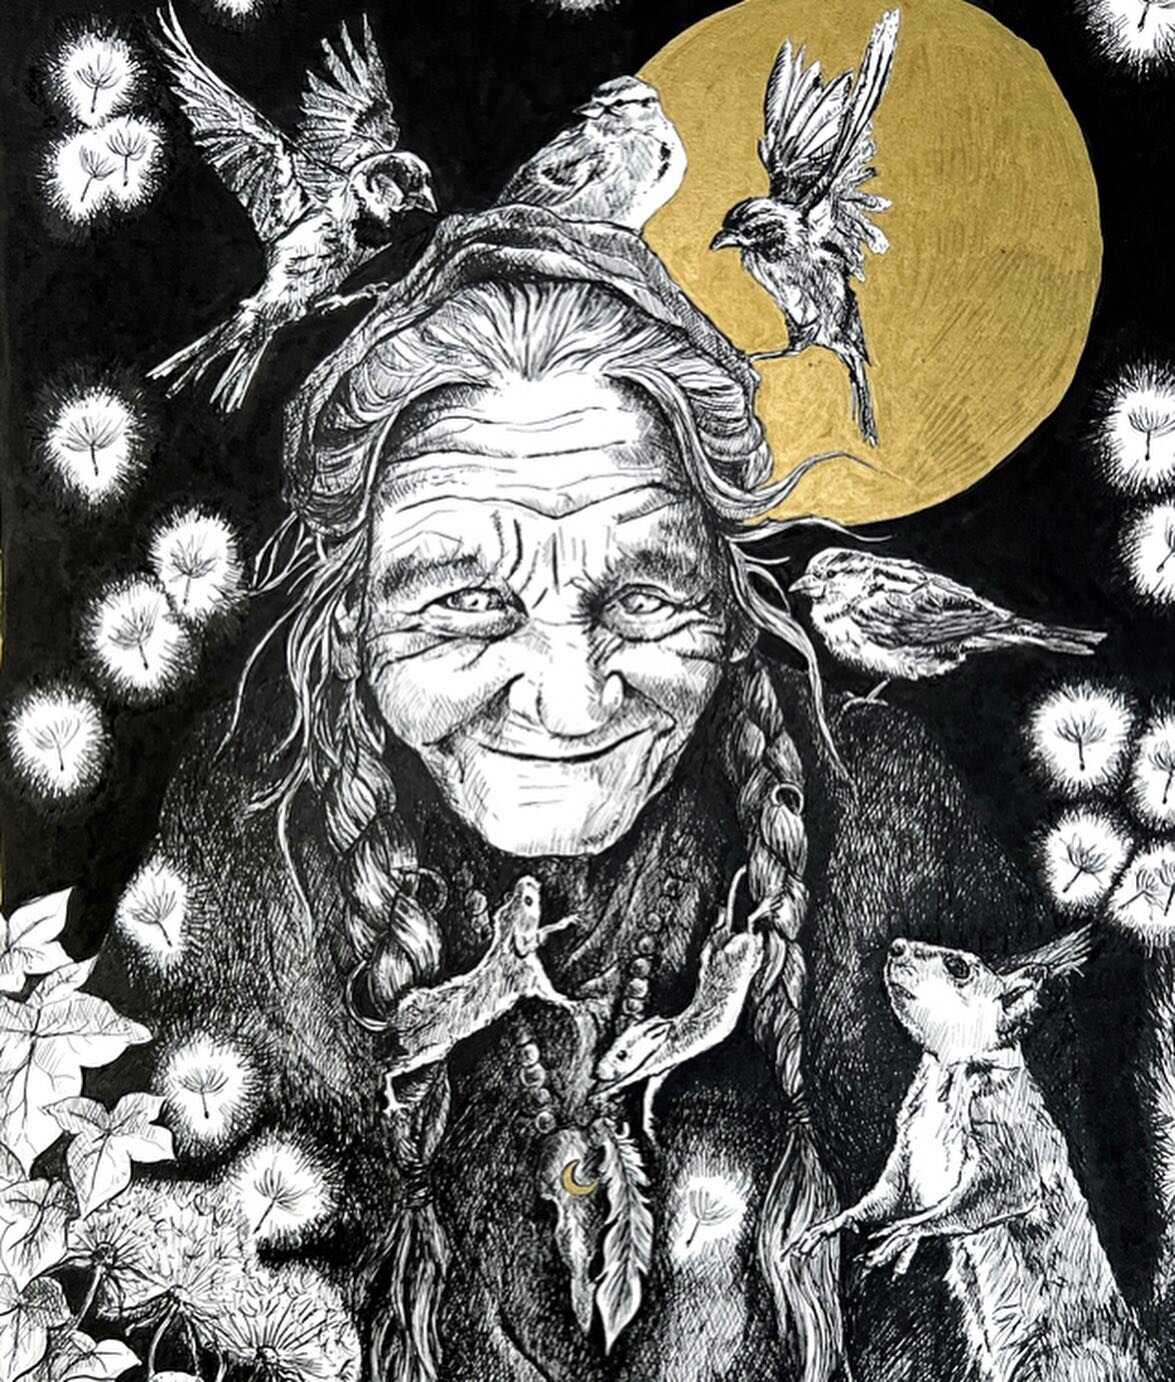 Grandmother Wish.
Pen and ink 

✨Limited Edition Prints ✨ now live on my website 🌙

A secret smile plays joyfully around wise, ancient lines ..

A whisper from a mouse ..

A private joke, just between them..?
Or a wish hushed with wishing &hellip; ?